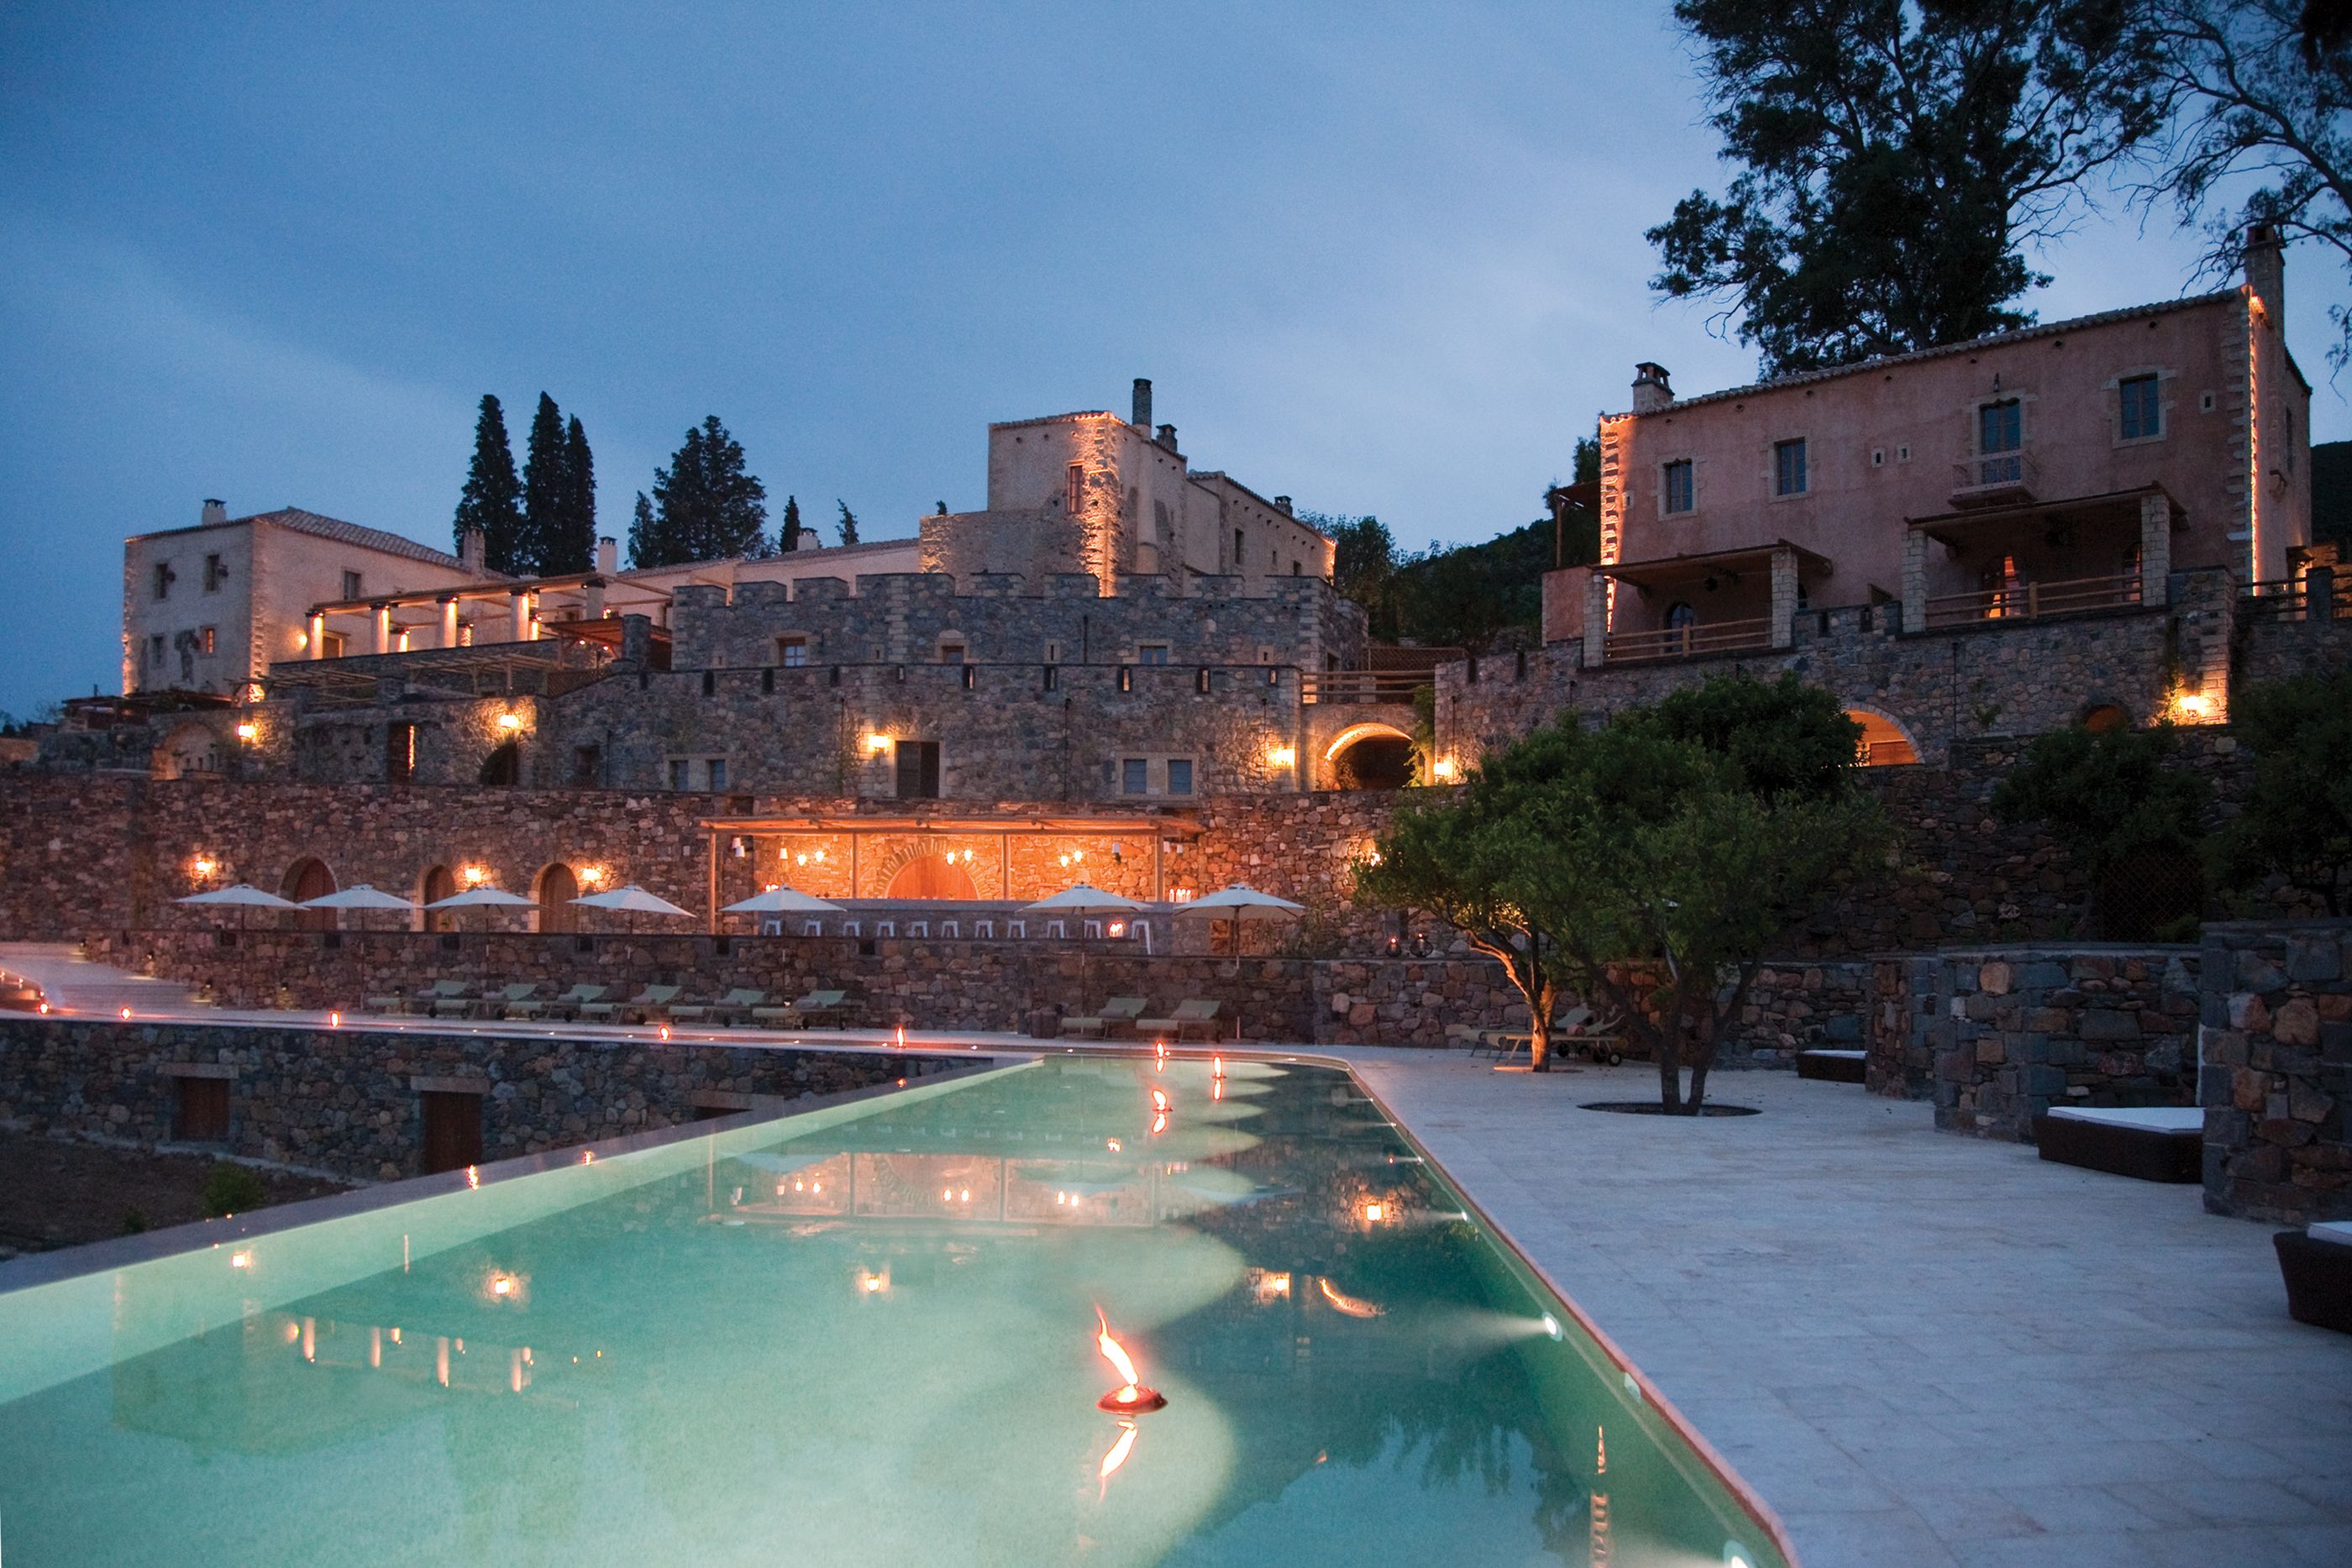 Swimming pool with facade at night of Kinsterna Hotel Monemvasia, Greece